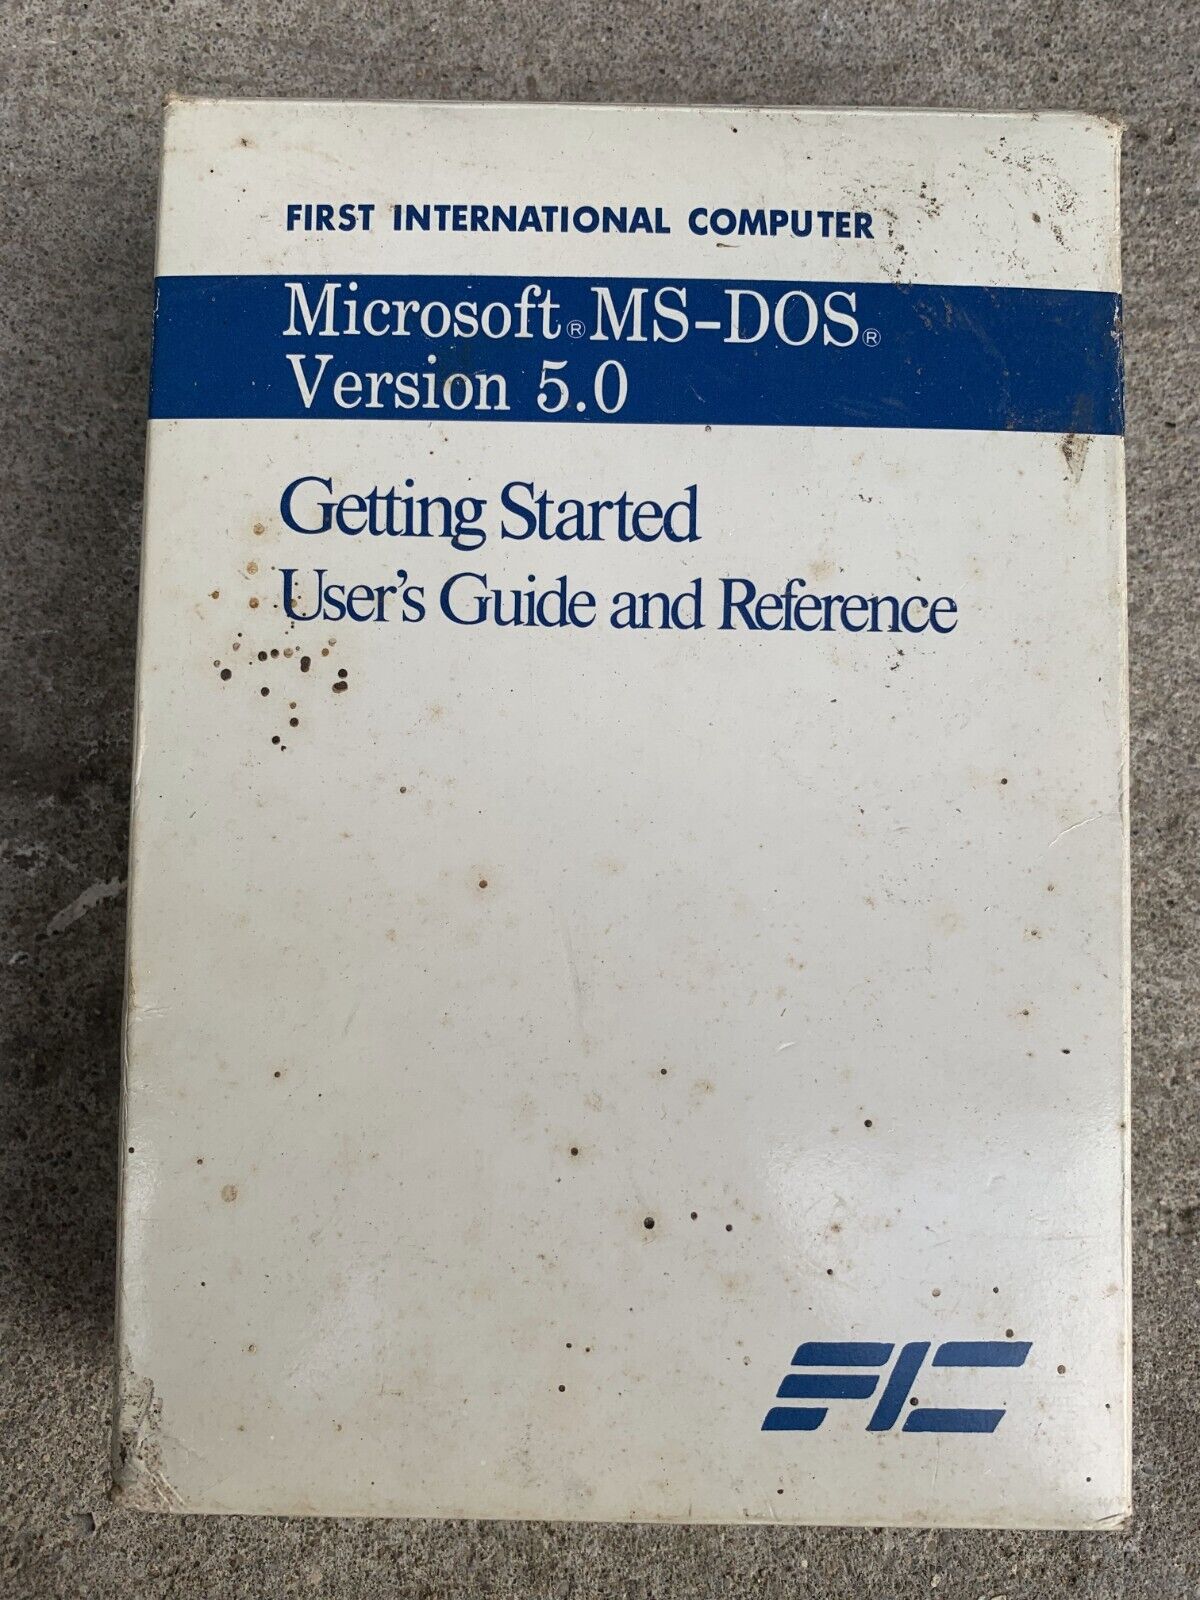 Microsoft MS-DOS Version 5.0 Getting Started User's Guide and Reference